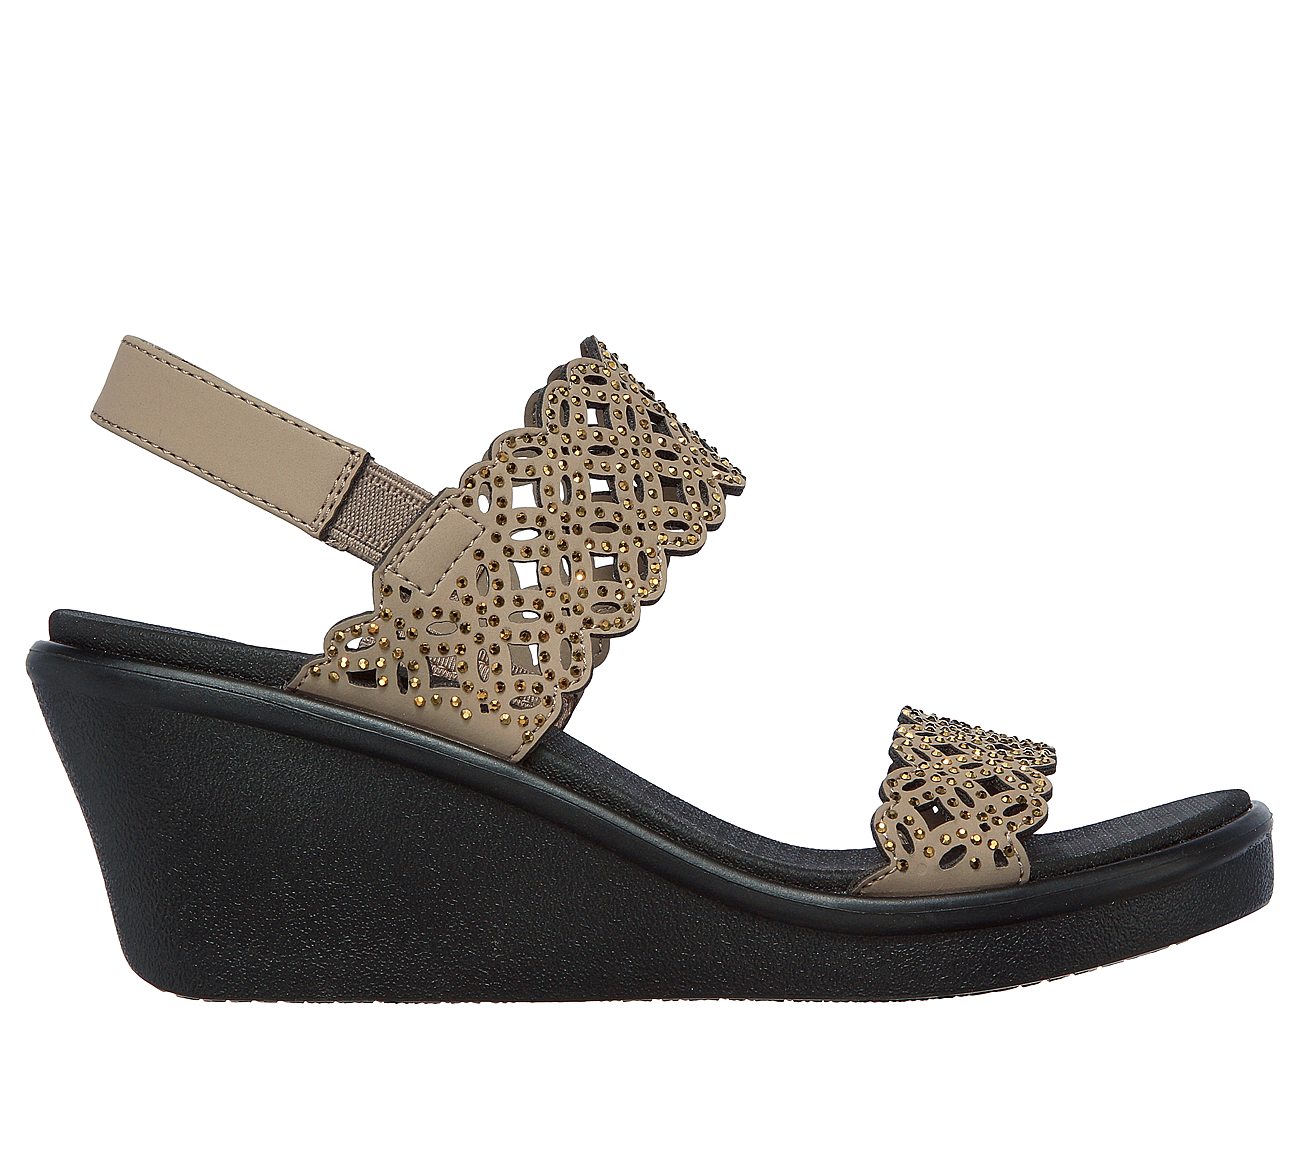 RUMBLE ON - SASSY DAYZ, TTAUPE Footwear Lateral View